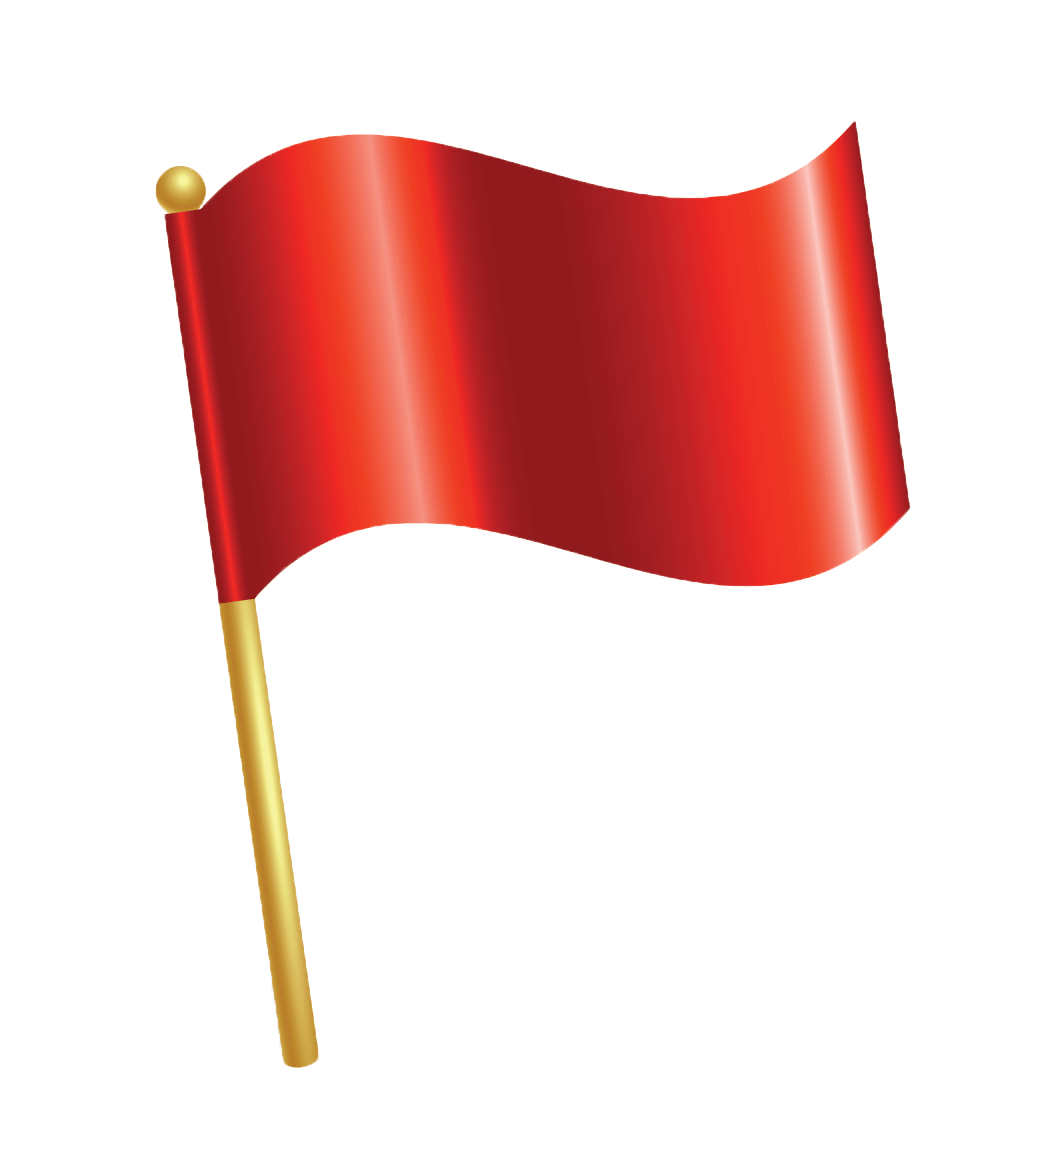 ... Red flag animated clipart - Red Flag Clip Art